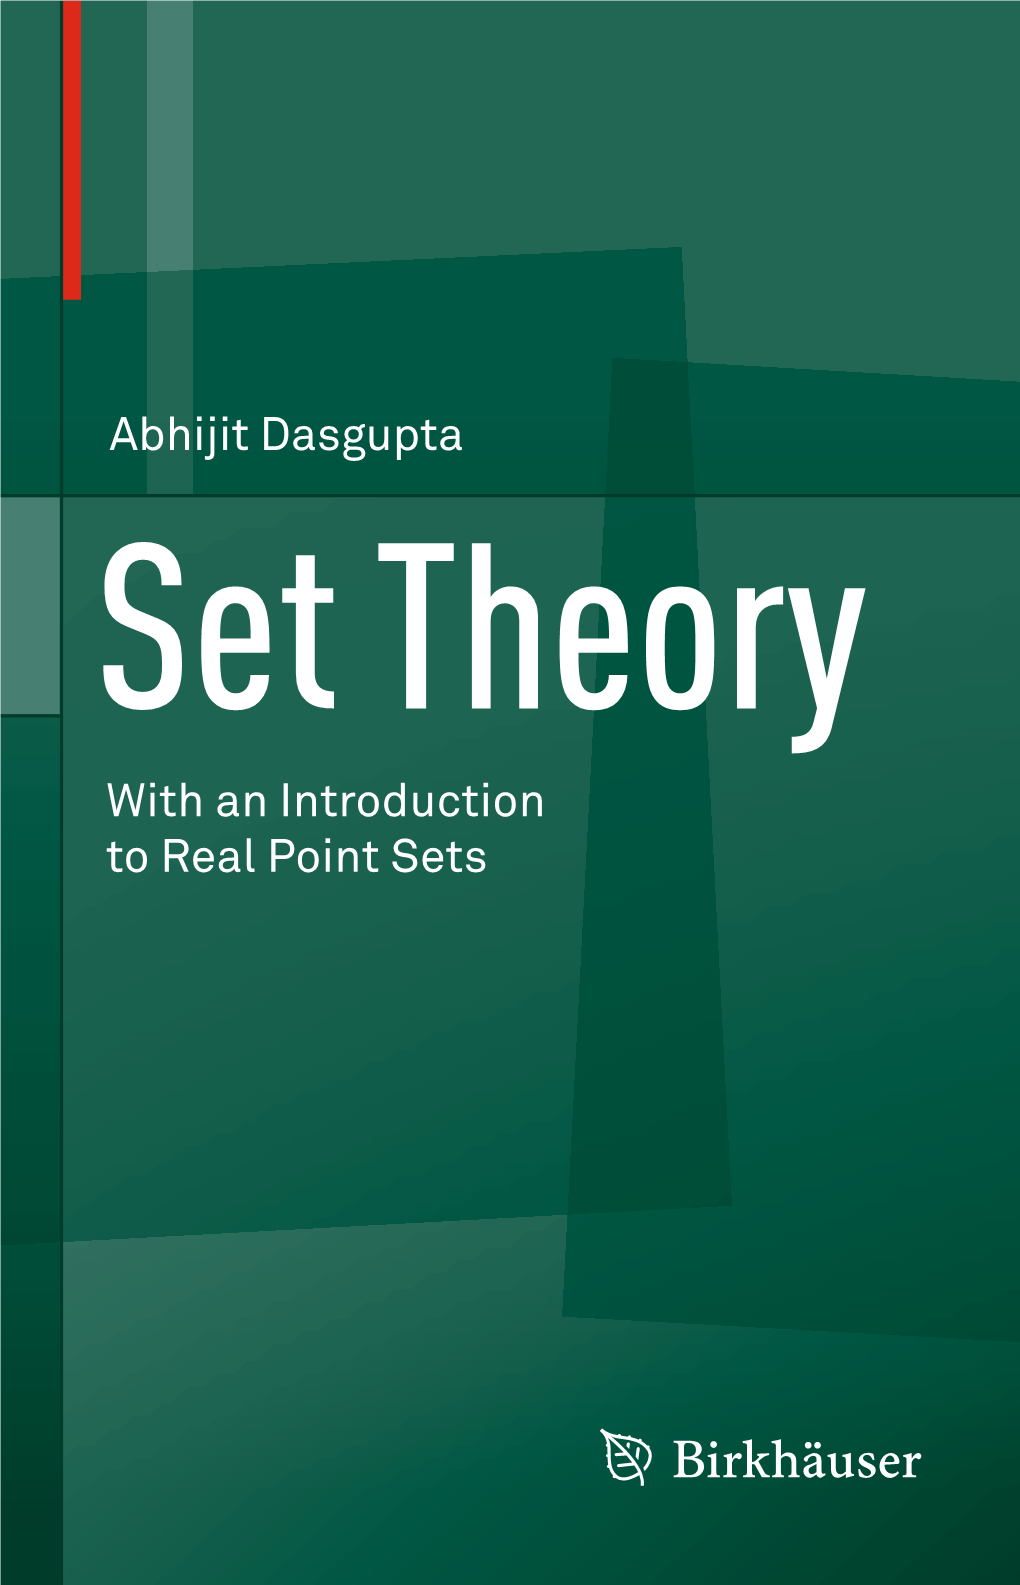 Abhijit Dasgupta with an Introduction to Real Point Sets